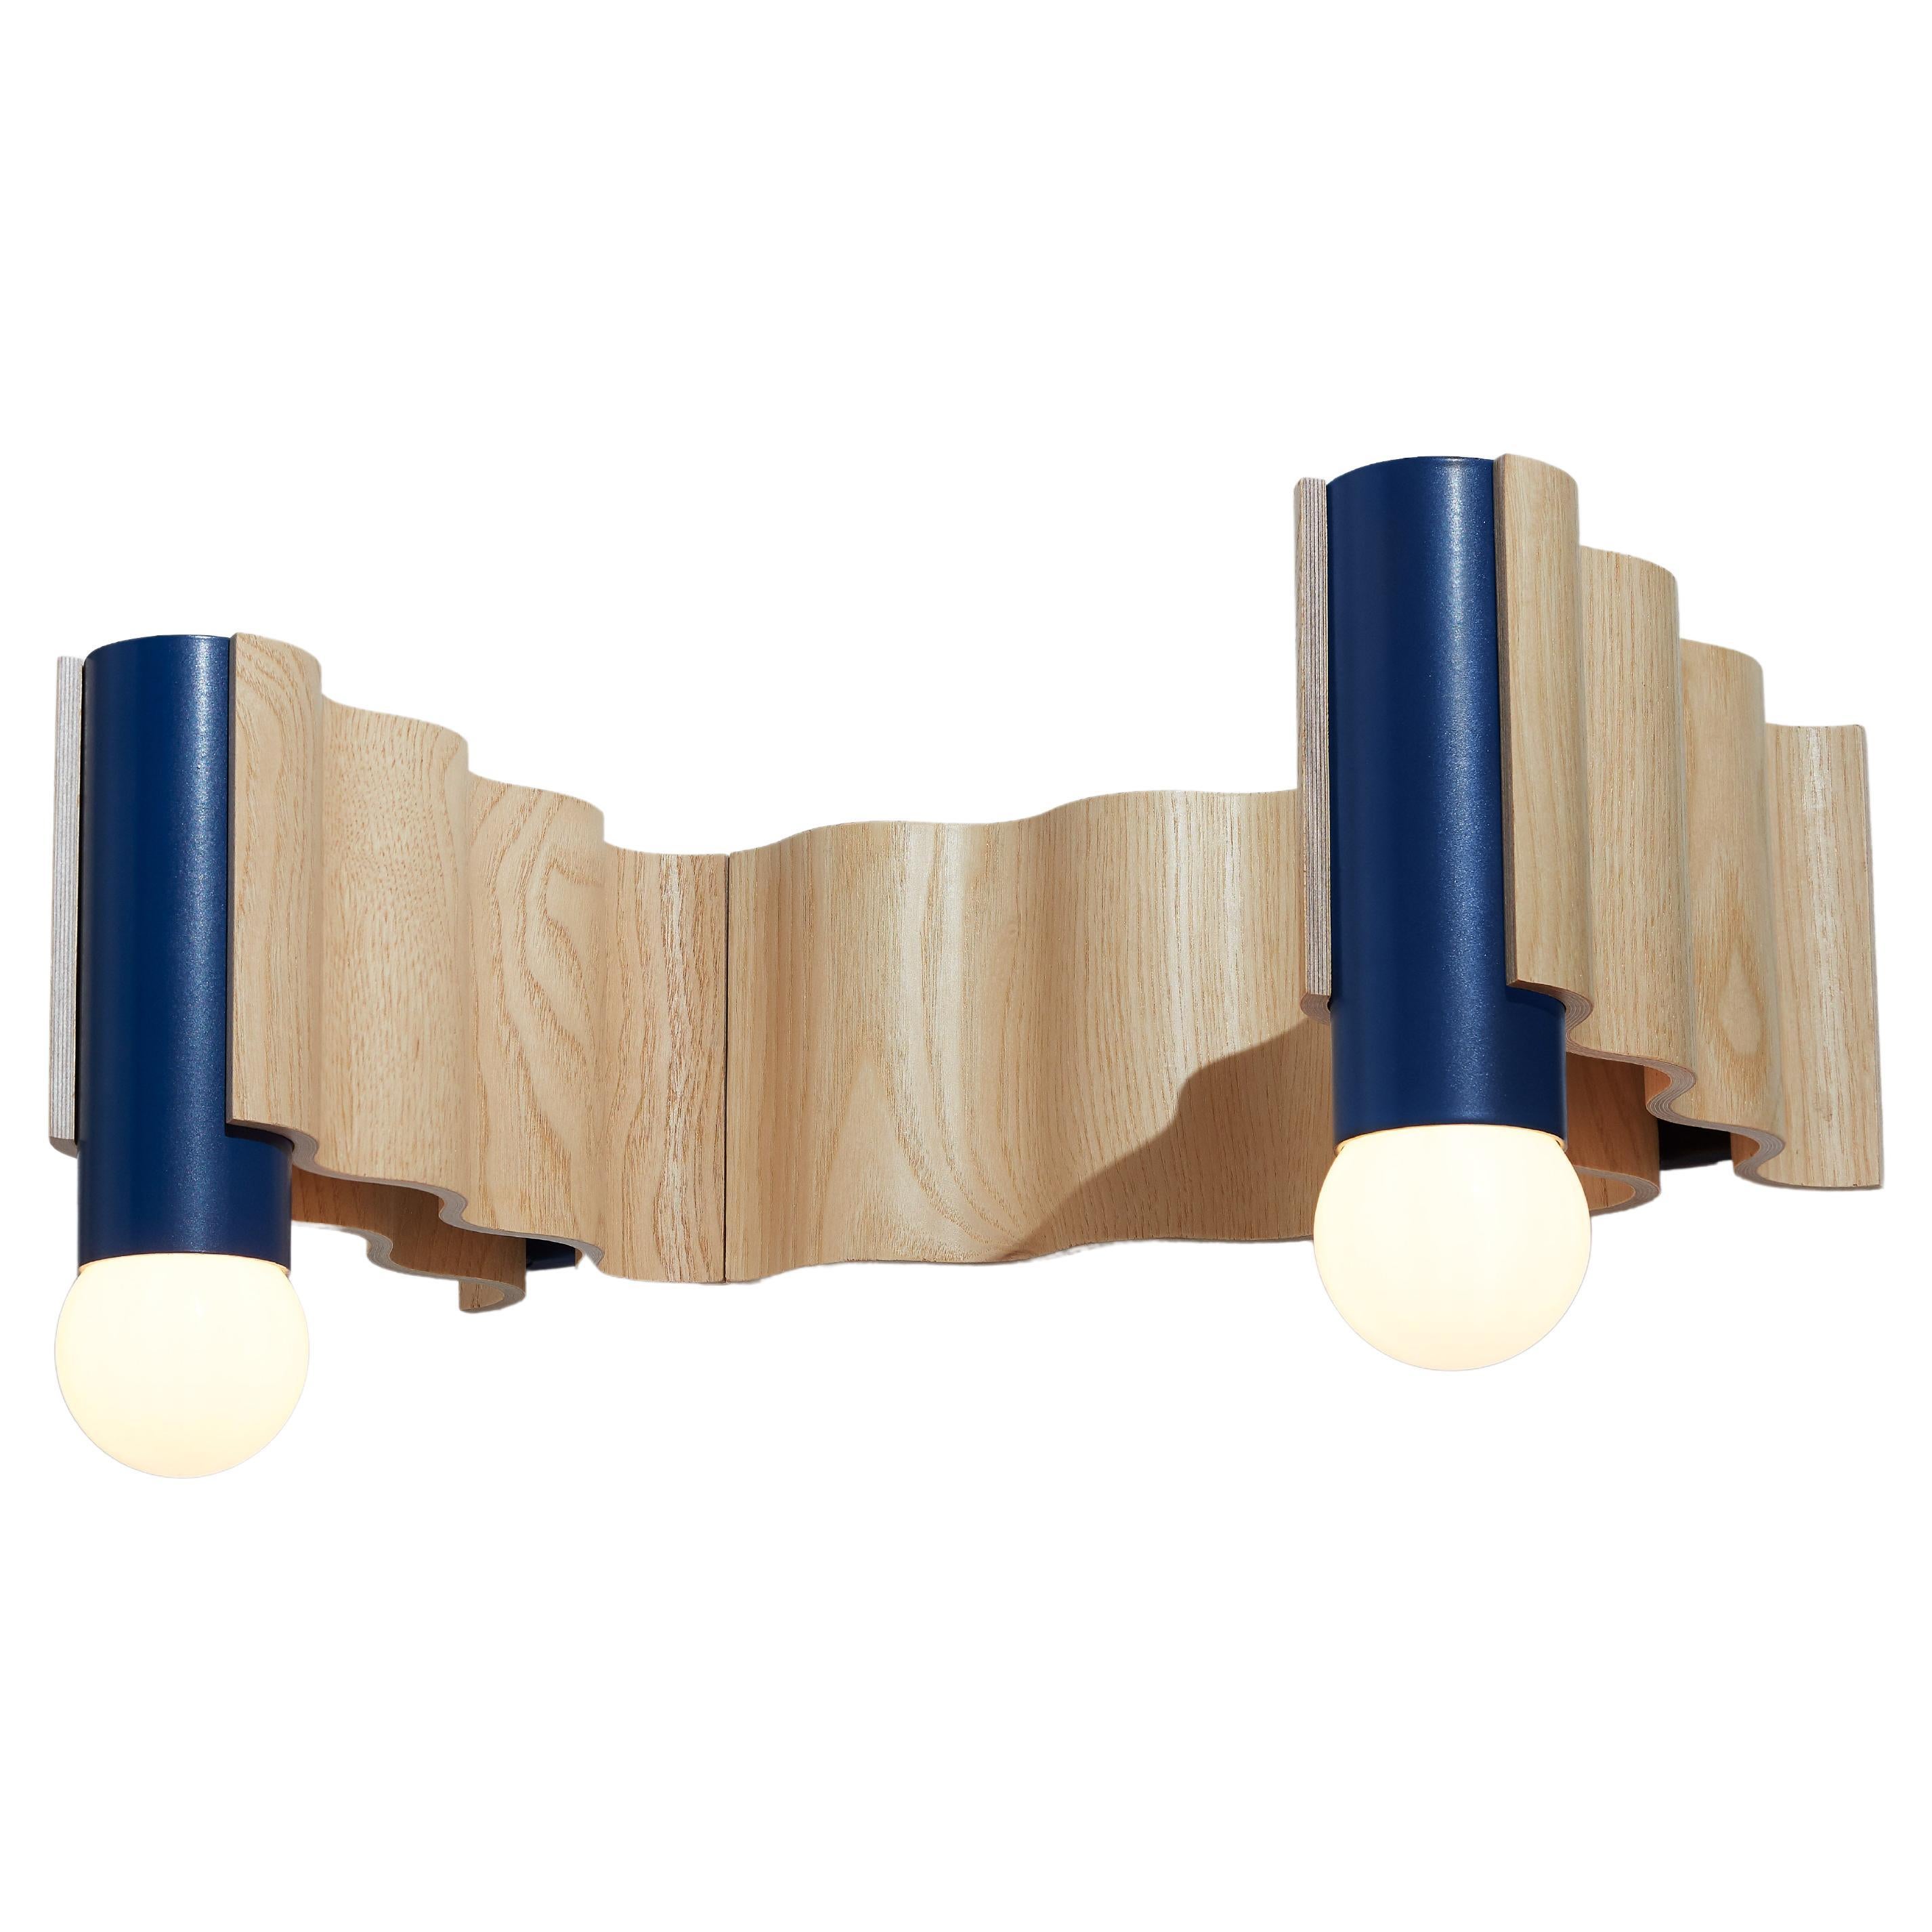 Double Corrugation Sconce / Wall Light in Natural Ash Veneer and Sapphire Blue For Sale